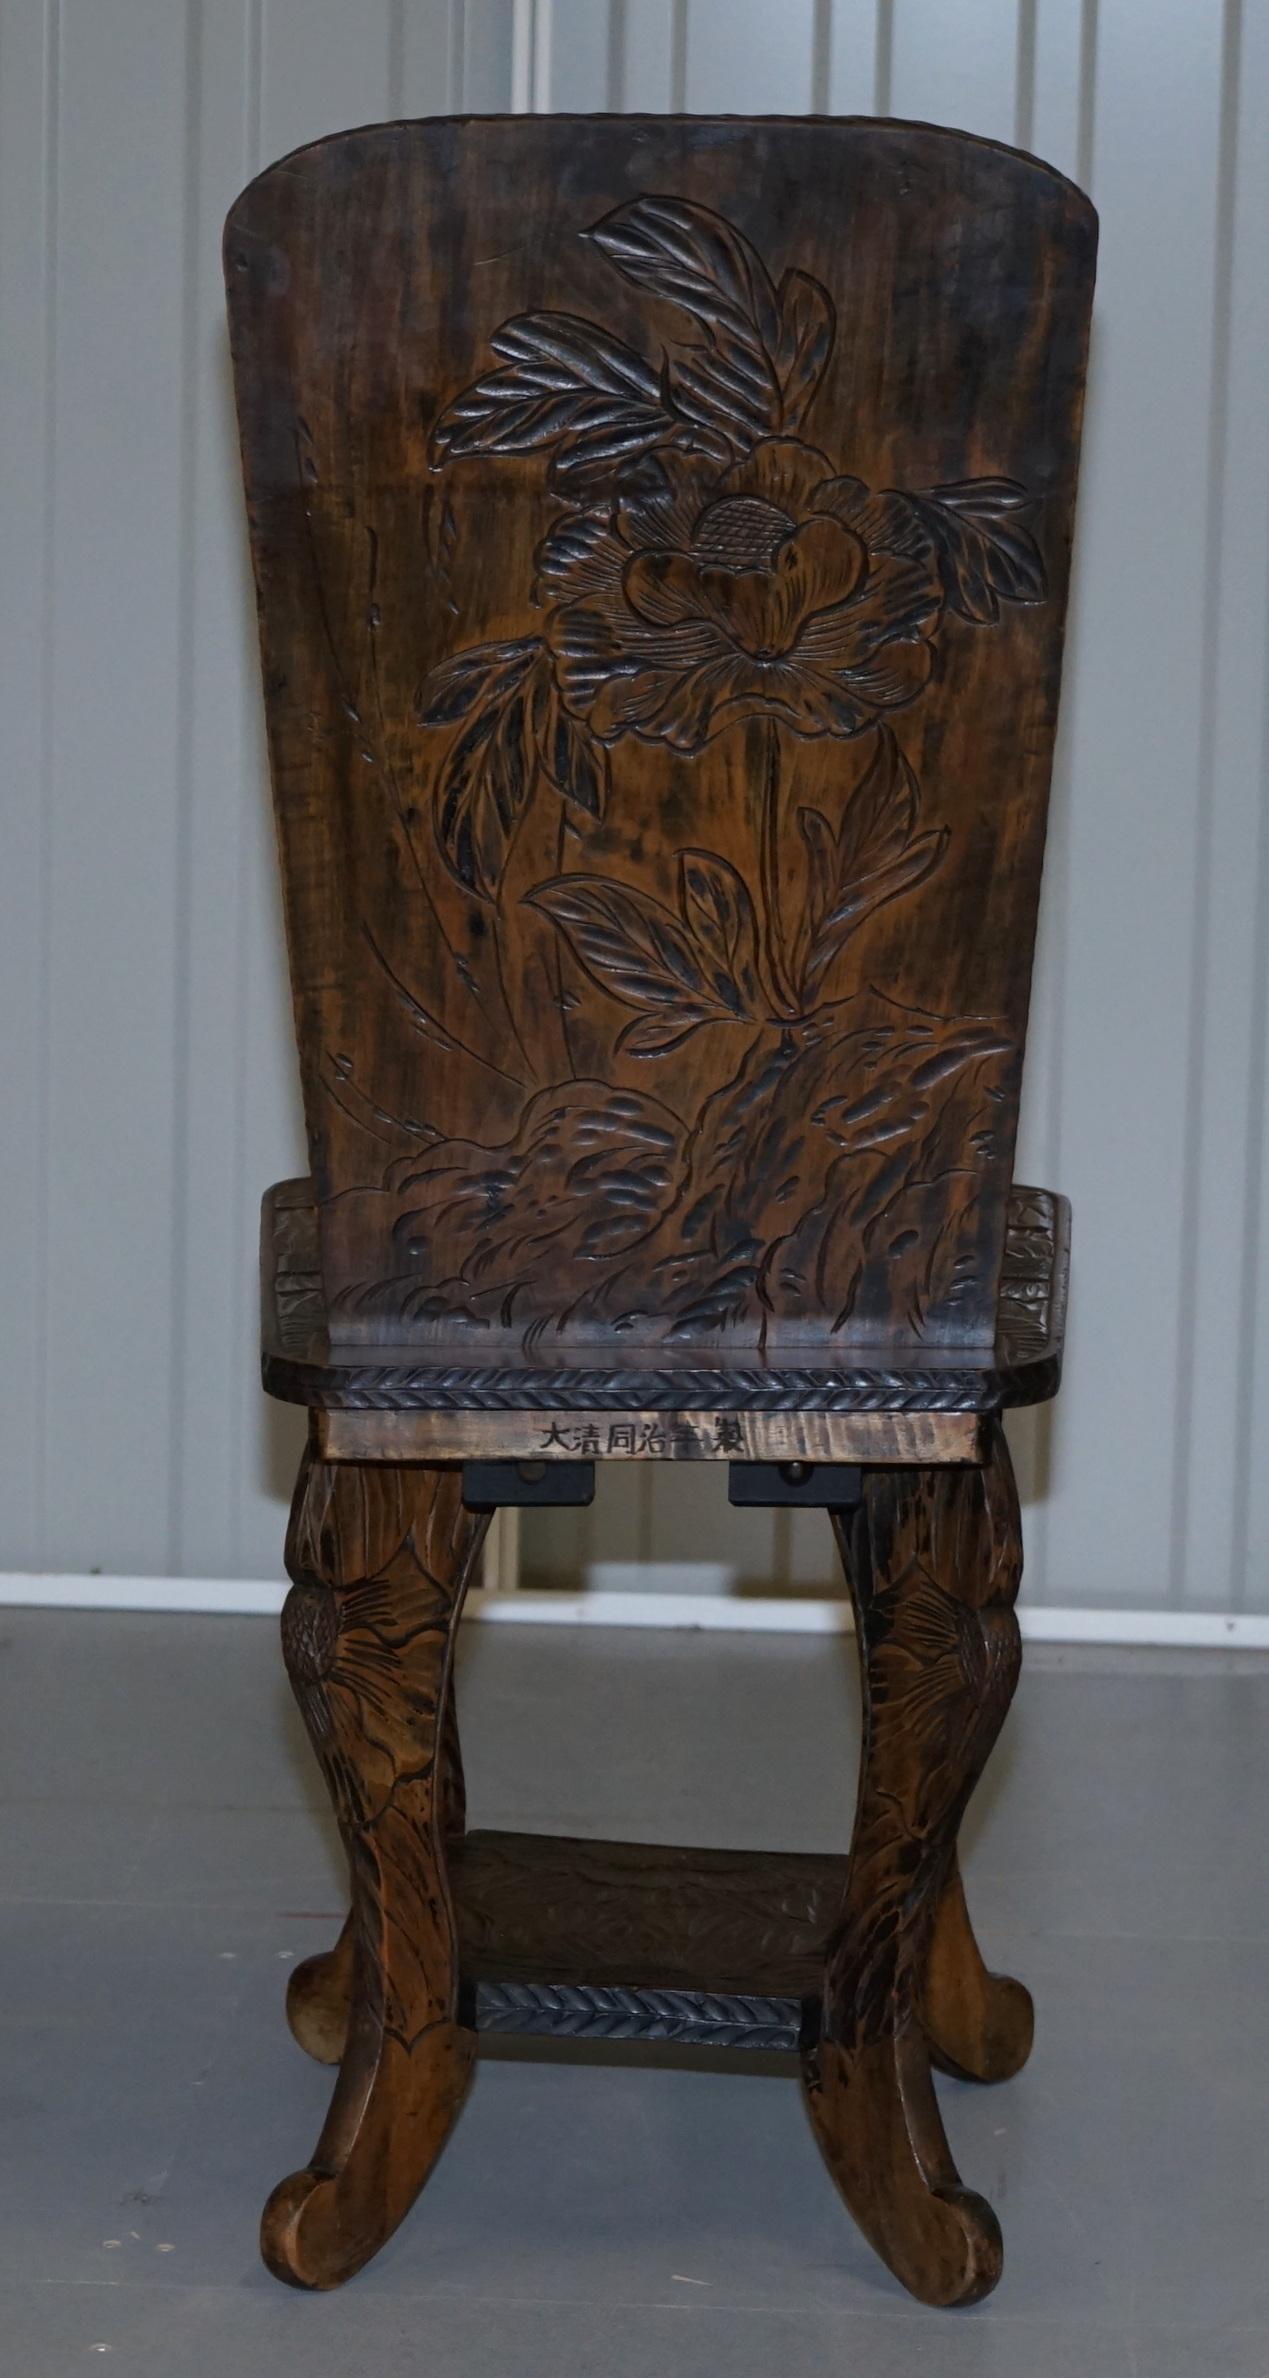 Very Rare Original Liberty's London Signed Qing Dynasty Chair Floral Carving For Sale 4